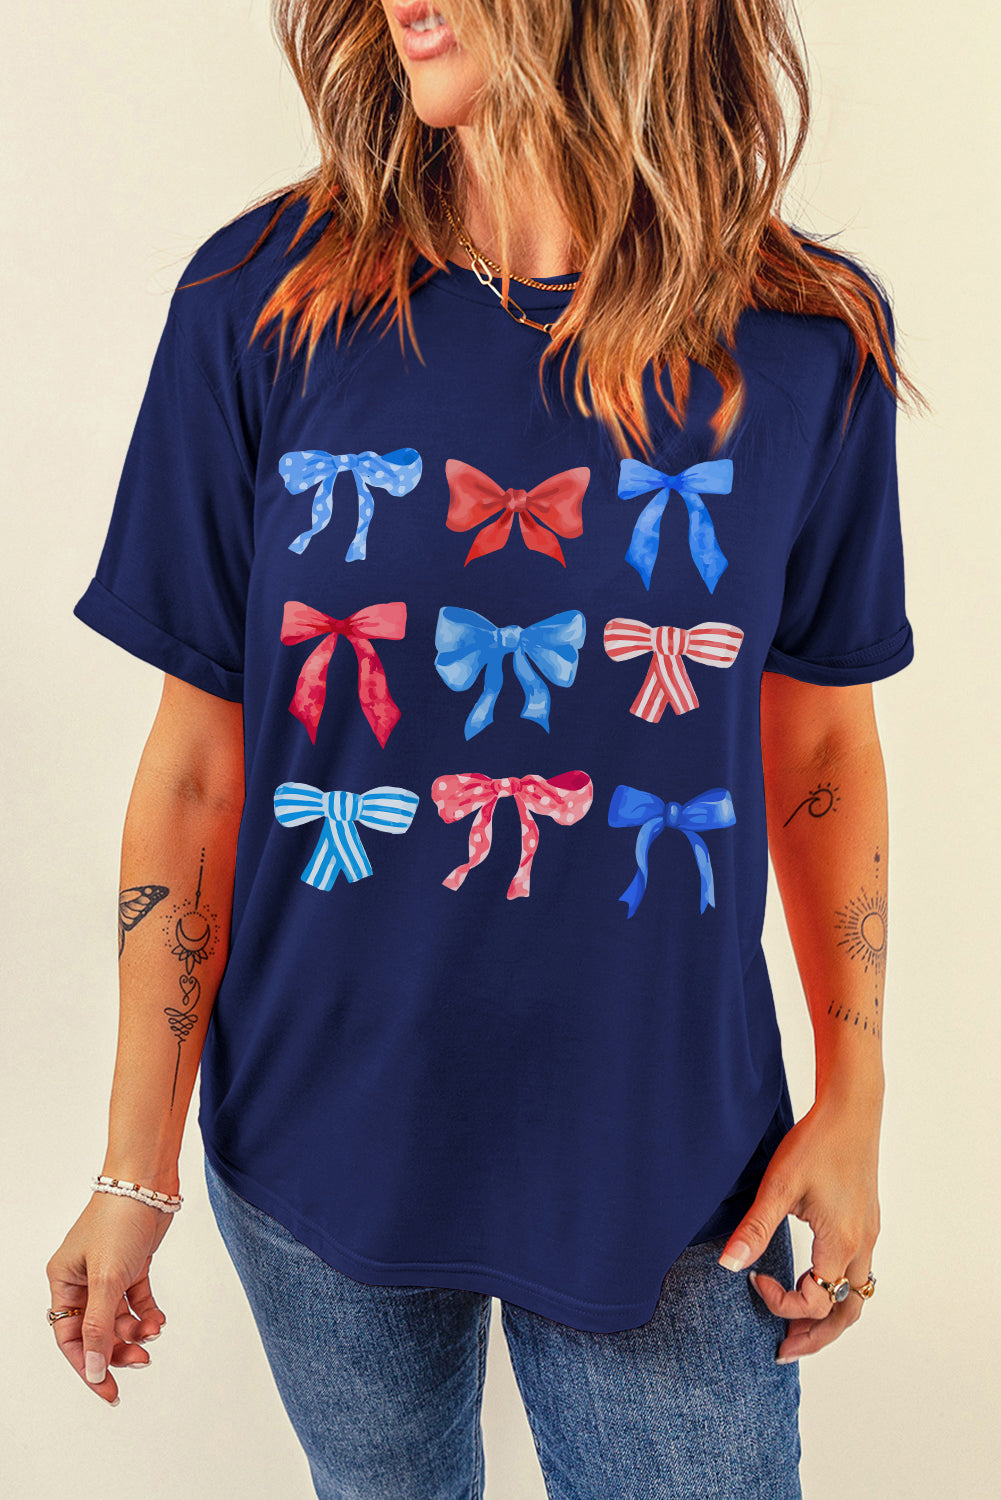 Stylish Bow Graphic Tee for Women - Round Neck Short Sleeve T-Shirt, Comfort Fit Casual Summer Top, Available in Various Sizes